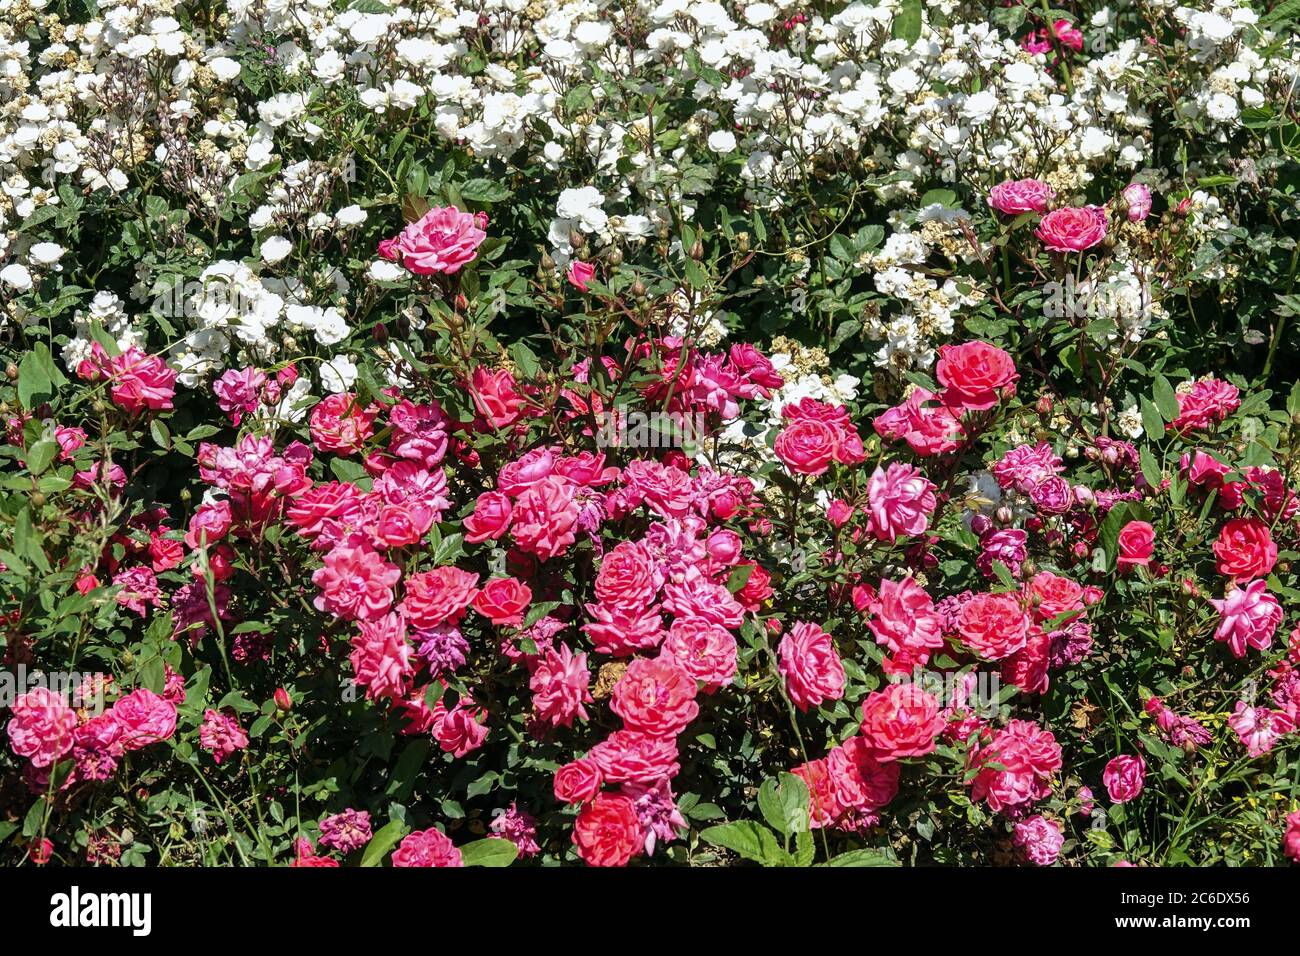 Pink white Flower bed of roses in garden Stock Photo